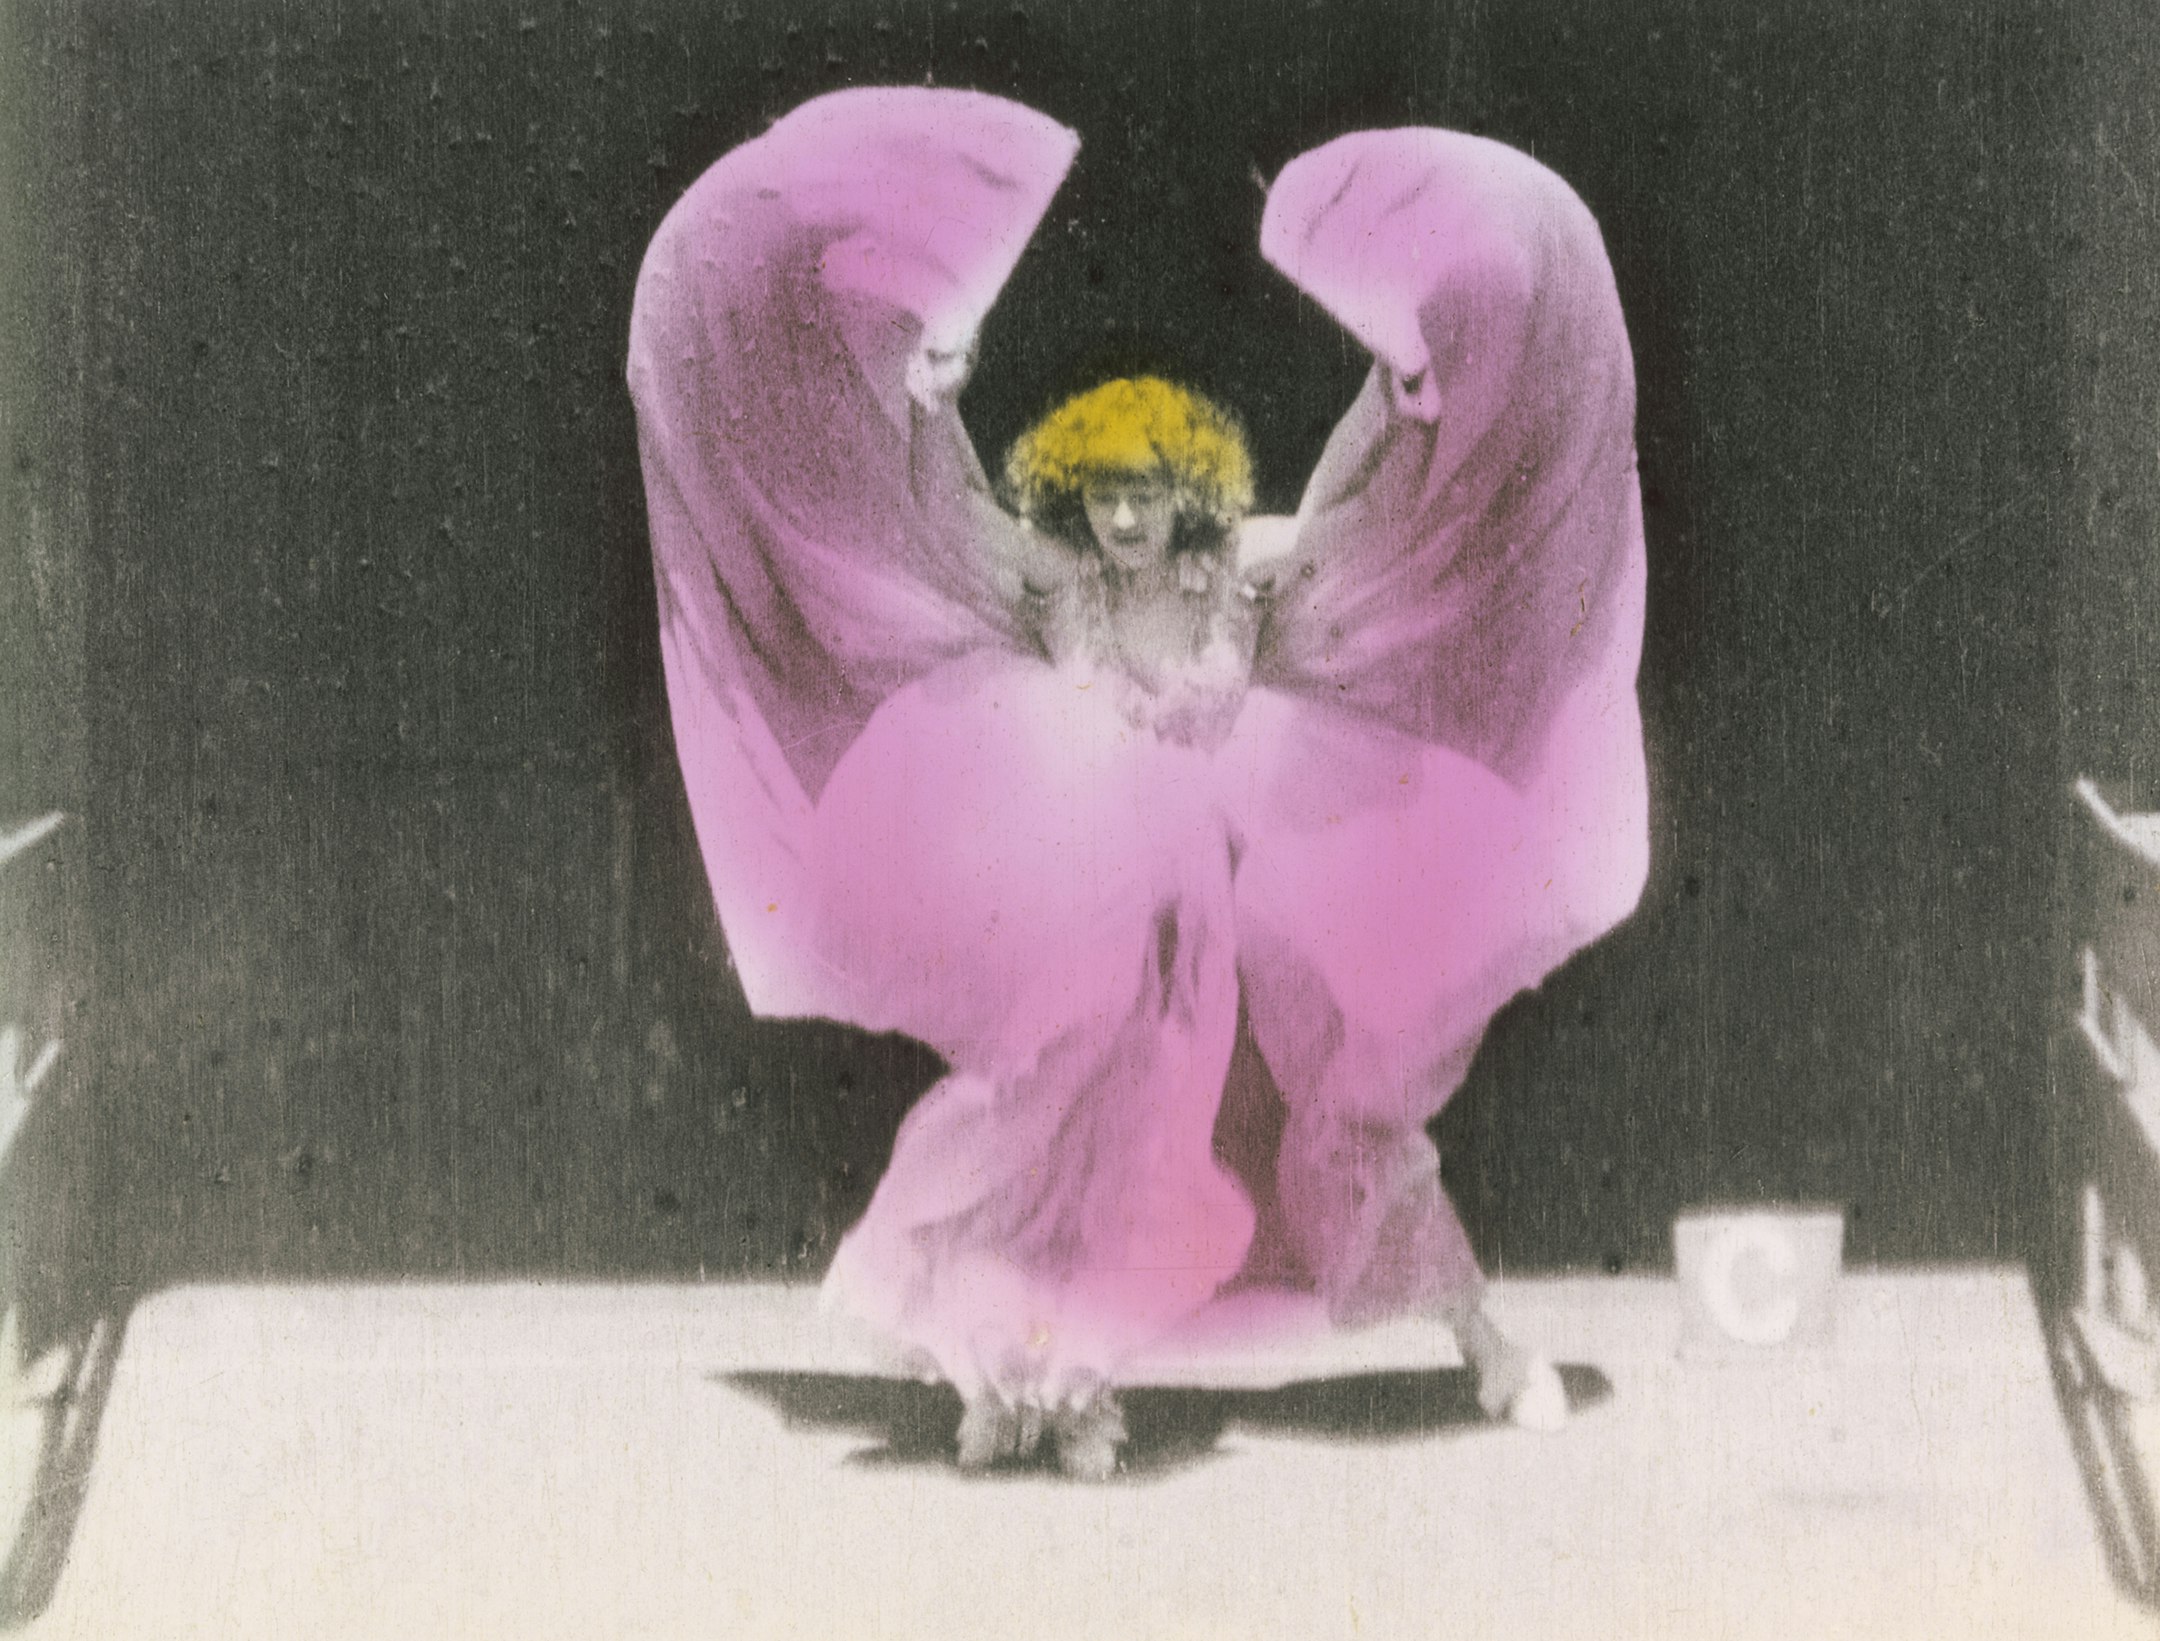 Hand-painted film still of woman in motion, dancing in a long, flowing skirt; the skirt is tinted pink and her hair is yellow.